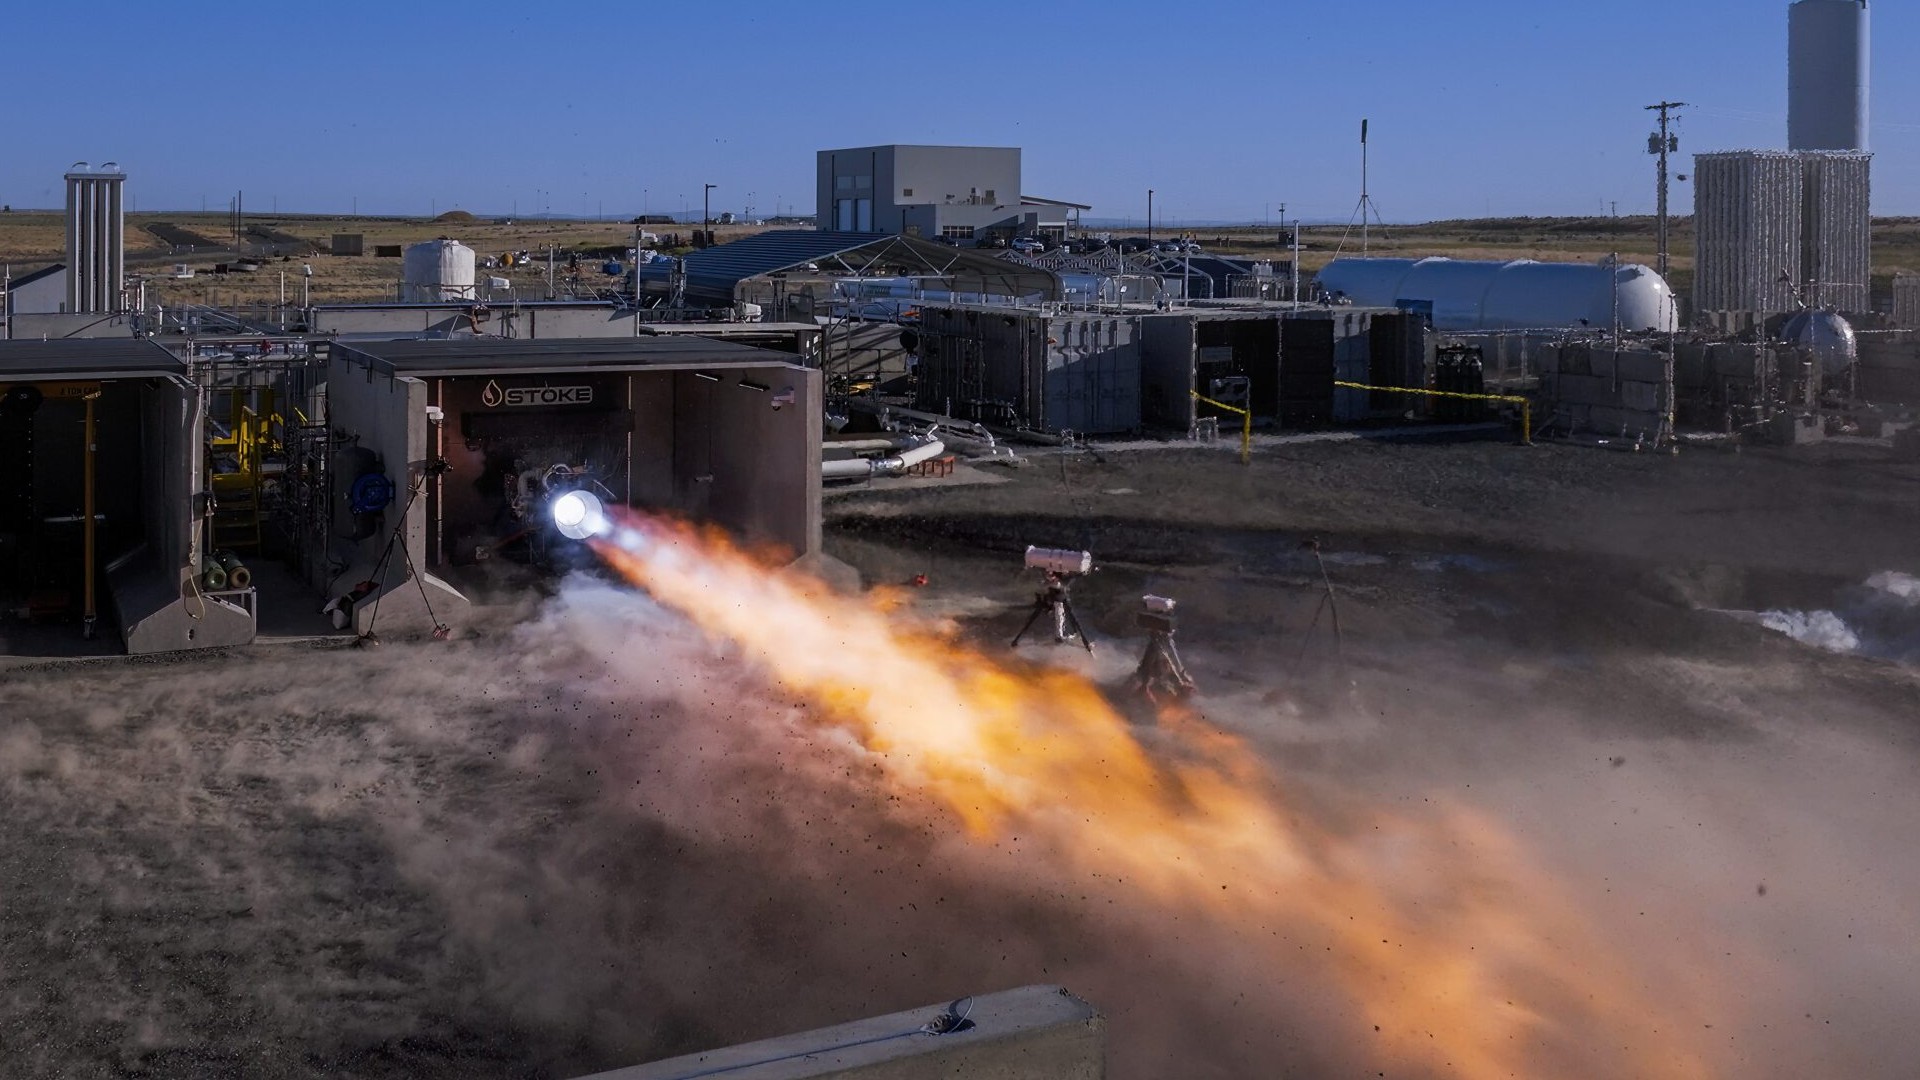 a rocket engine sits horizontally on a test stand outside, belching hot fire